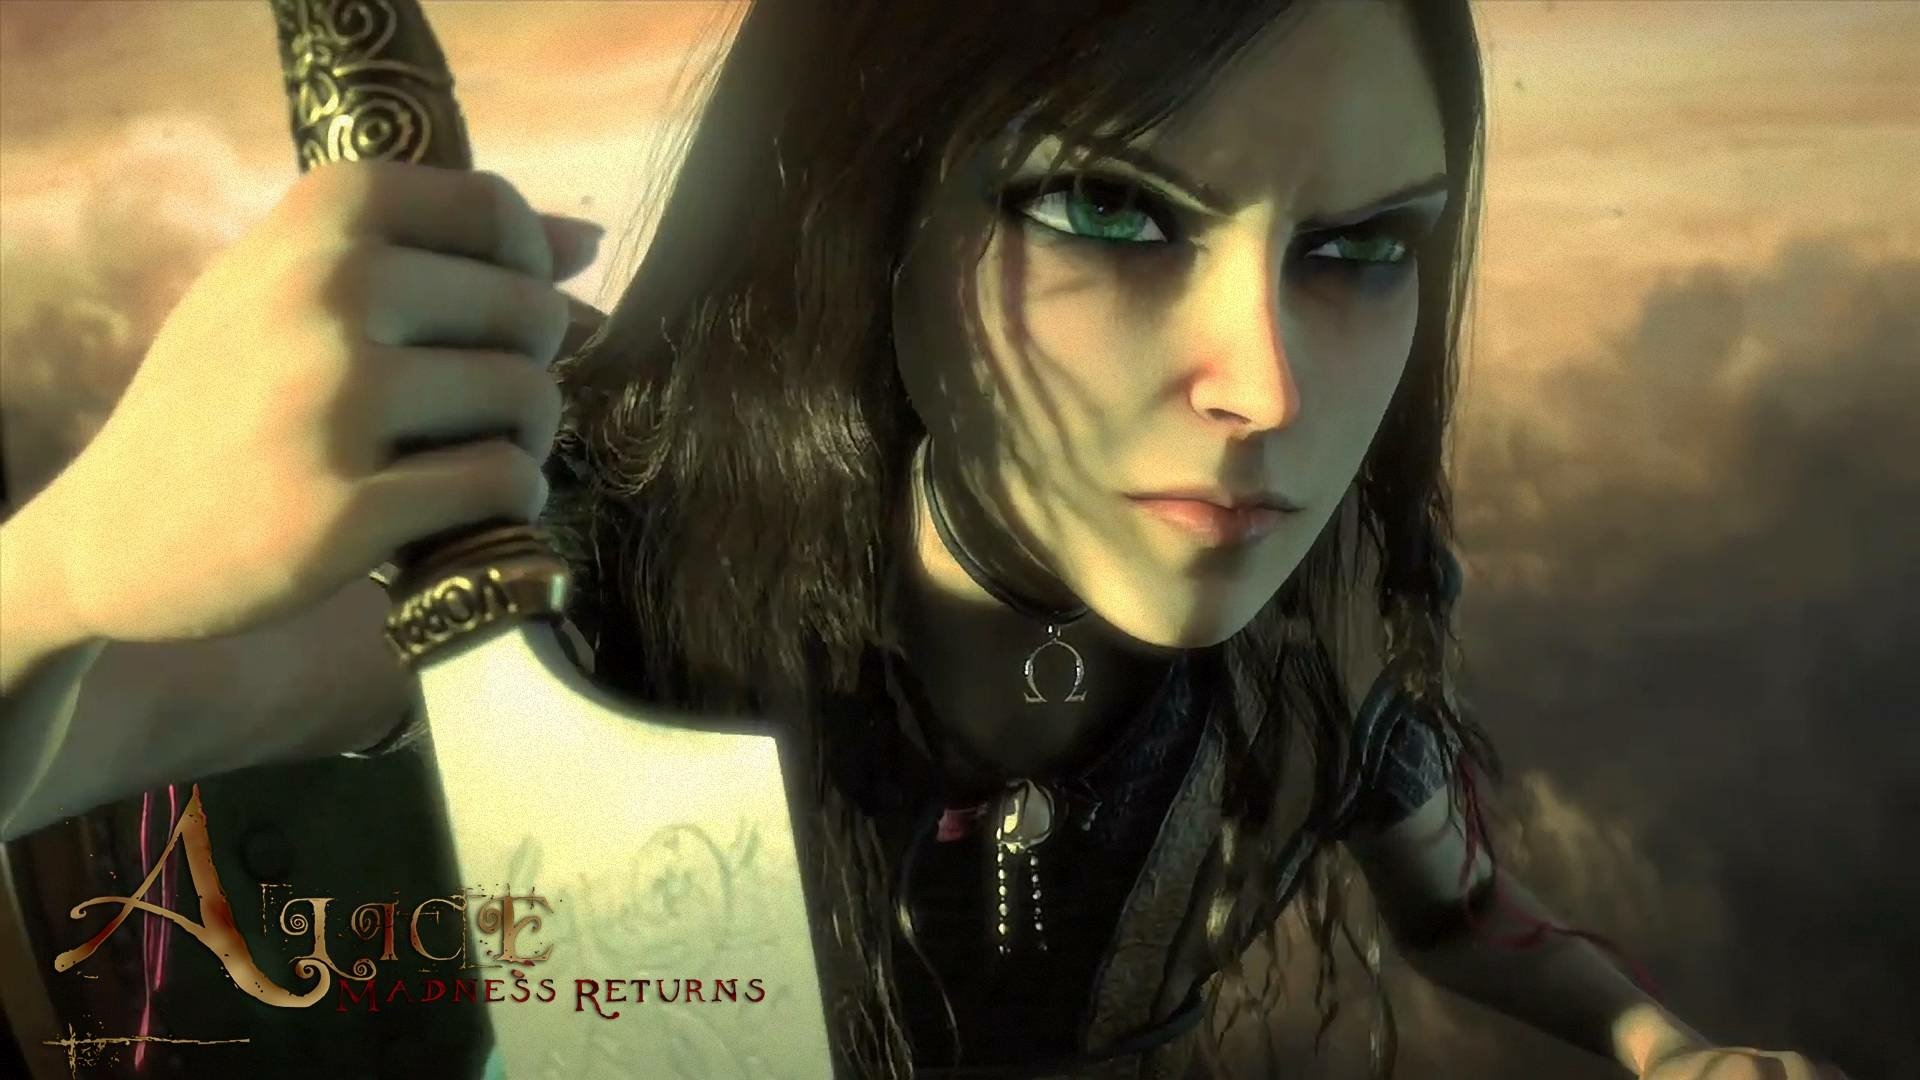 1920x1080 Alice: Madness Returns Wallpaper Background Image. 